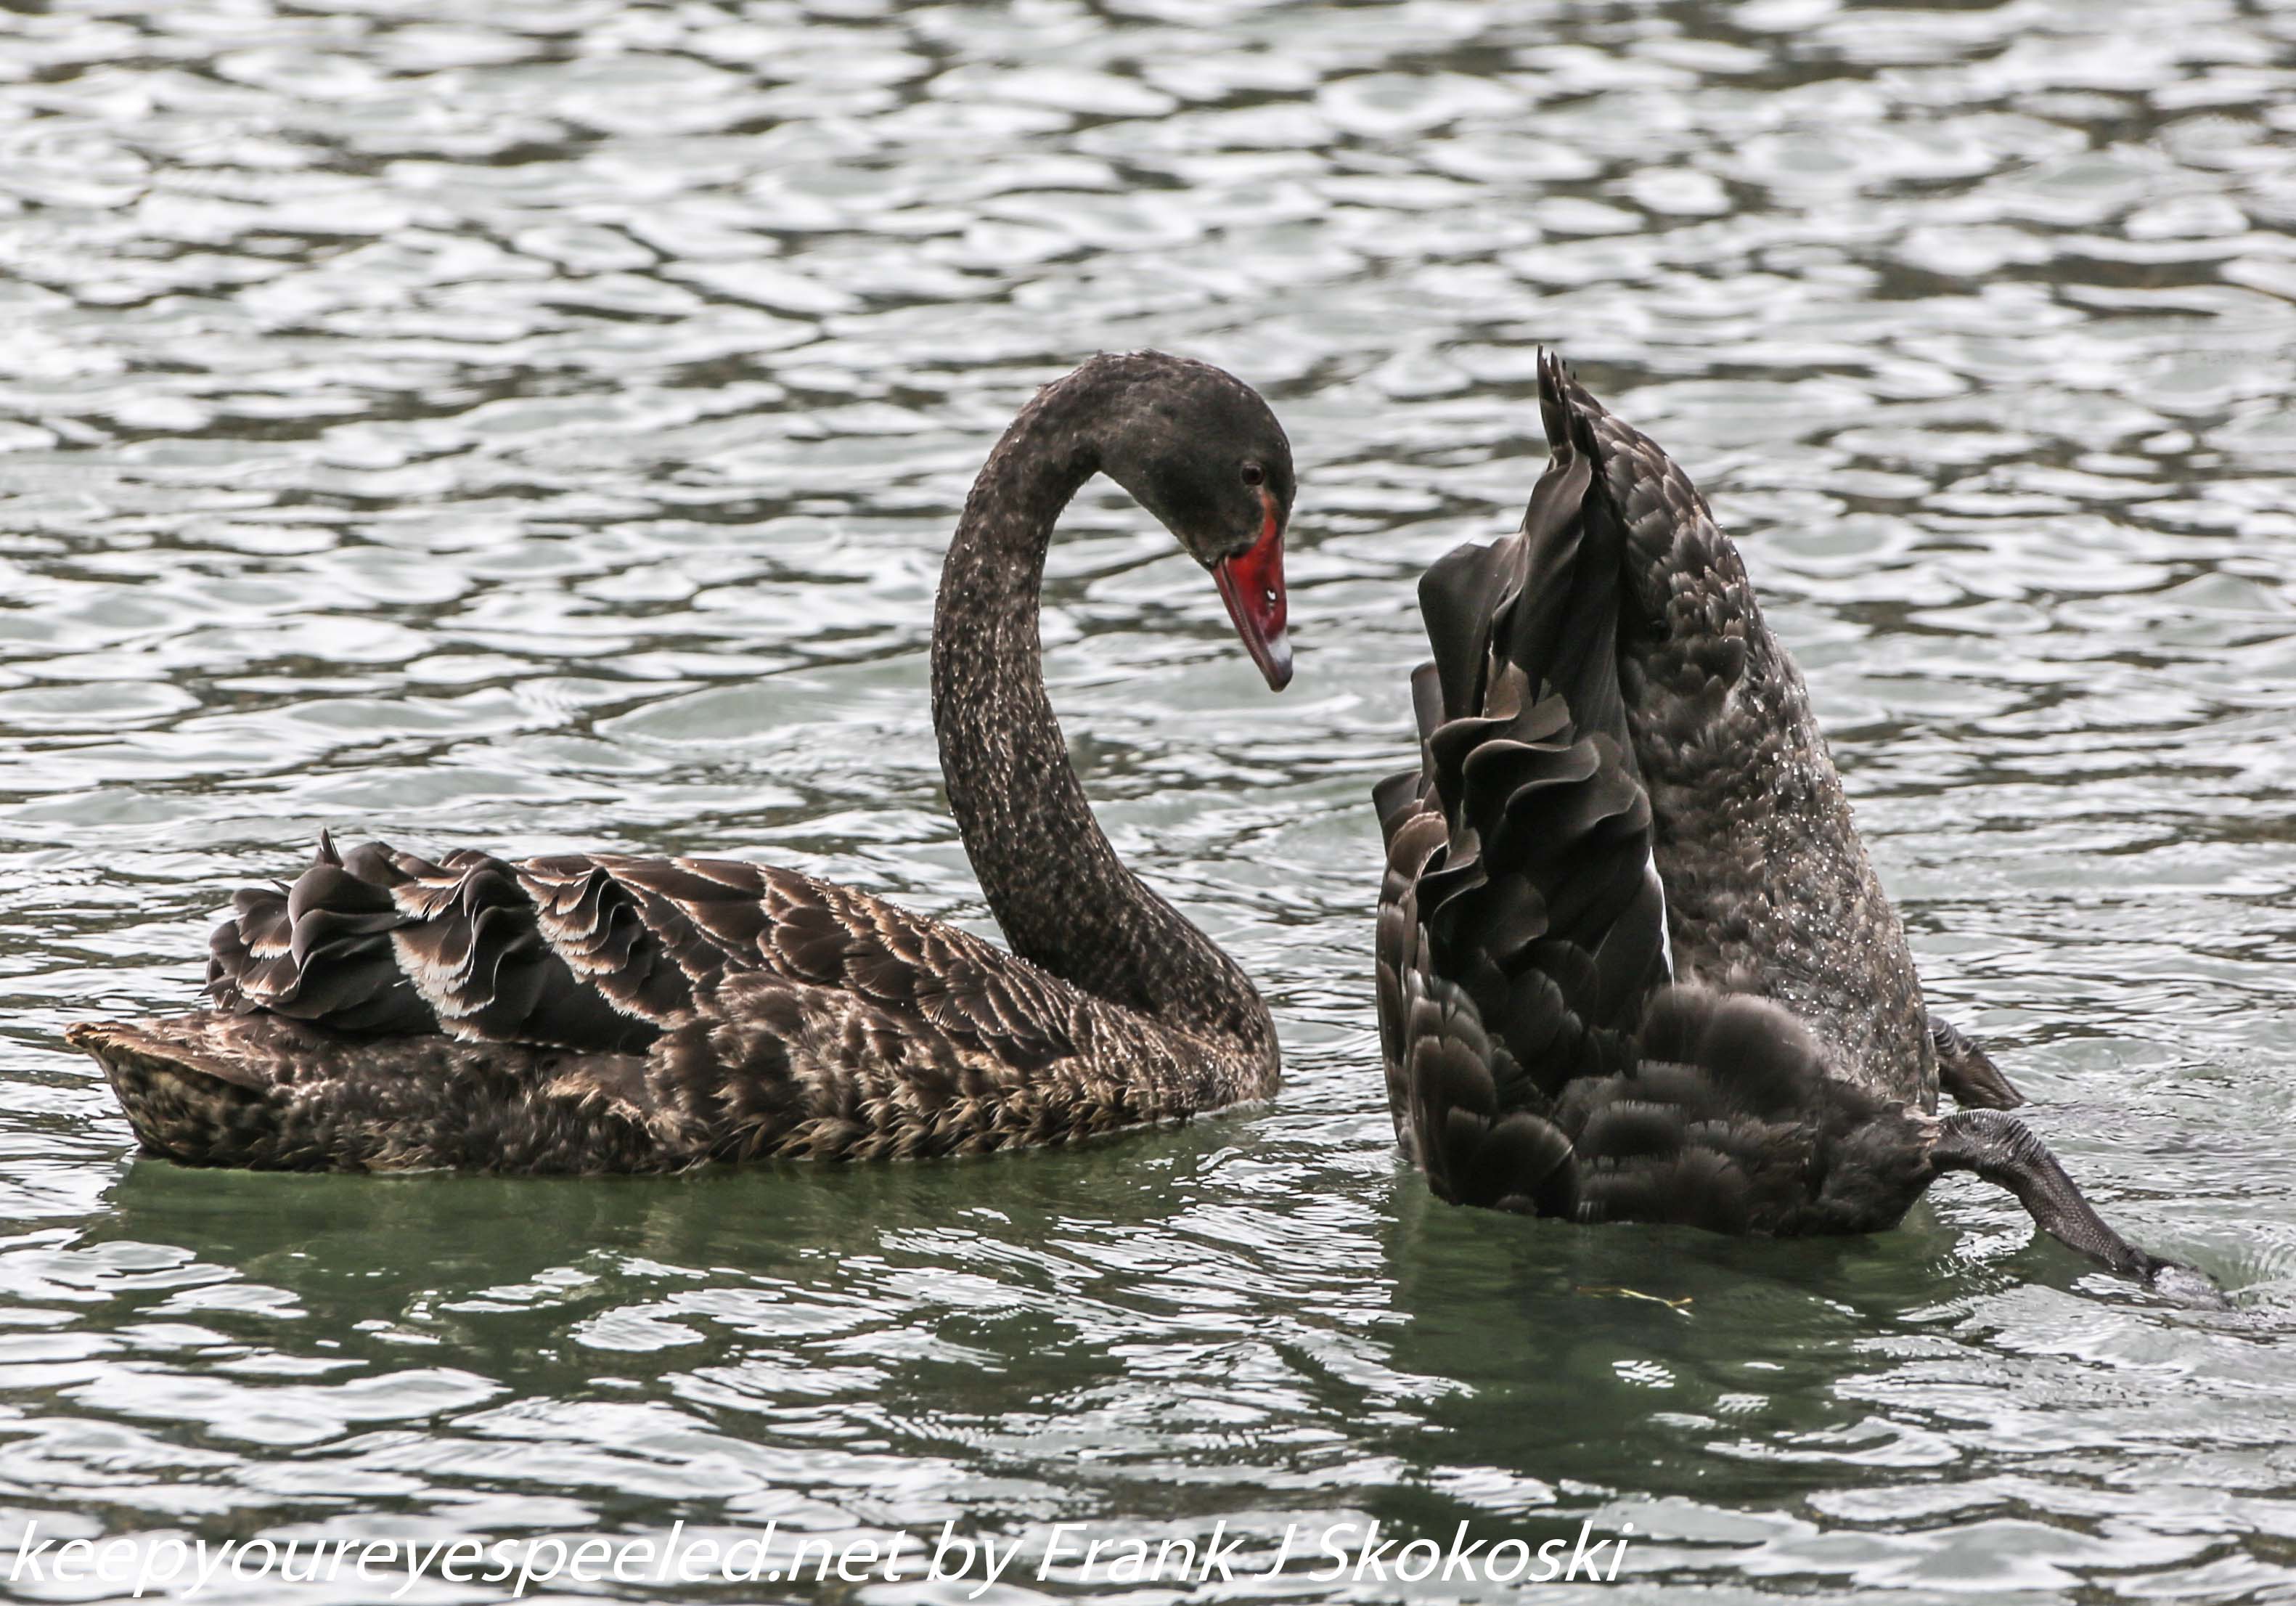 New-Zealand-Day-Seven-Glenorchy-black-swan-12-of-12